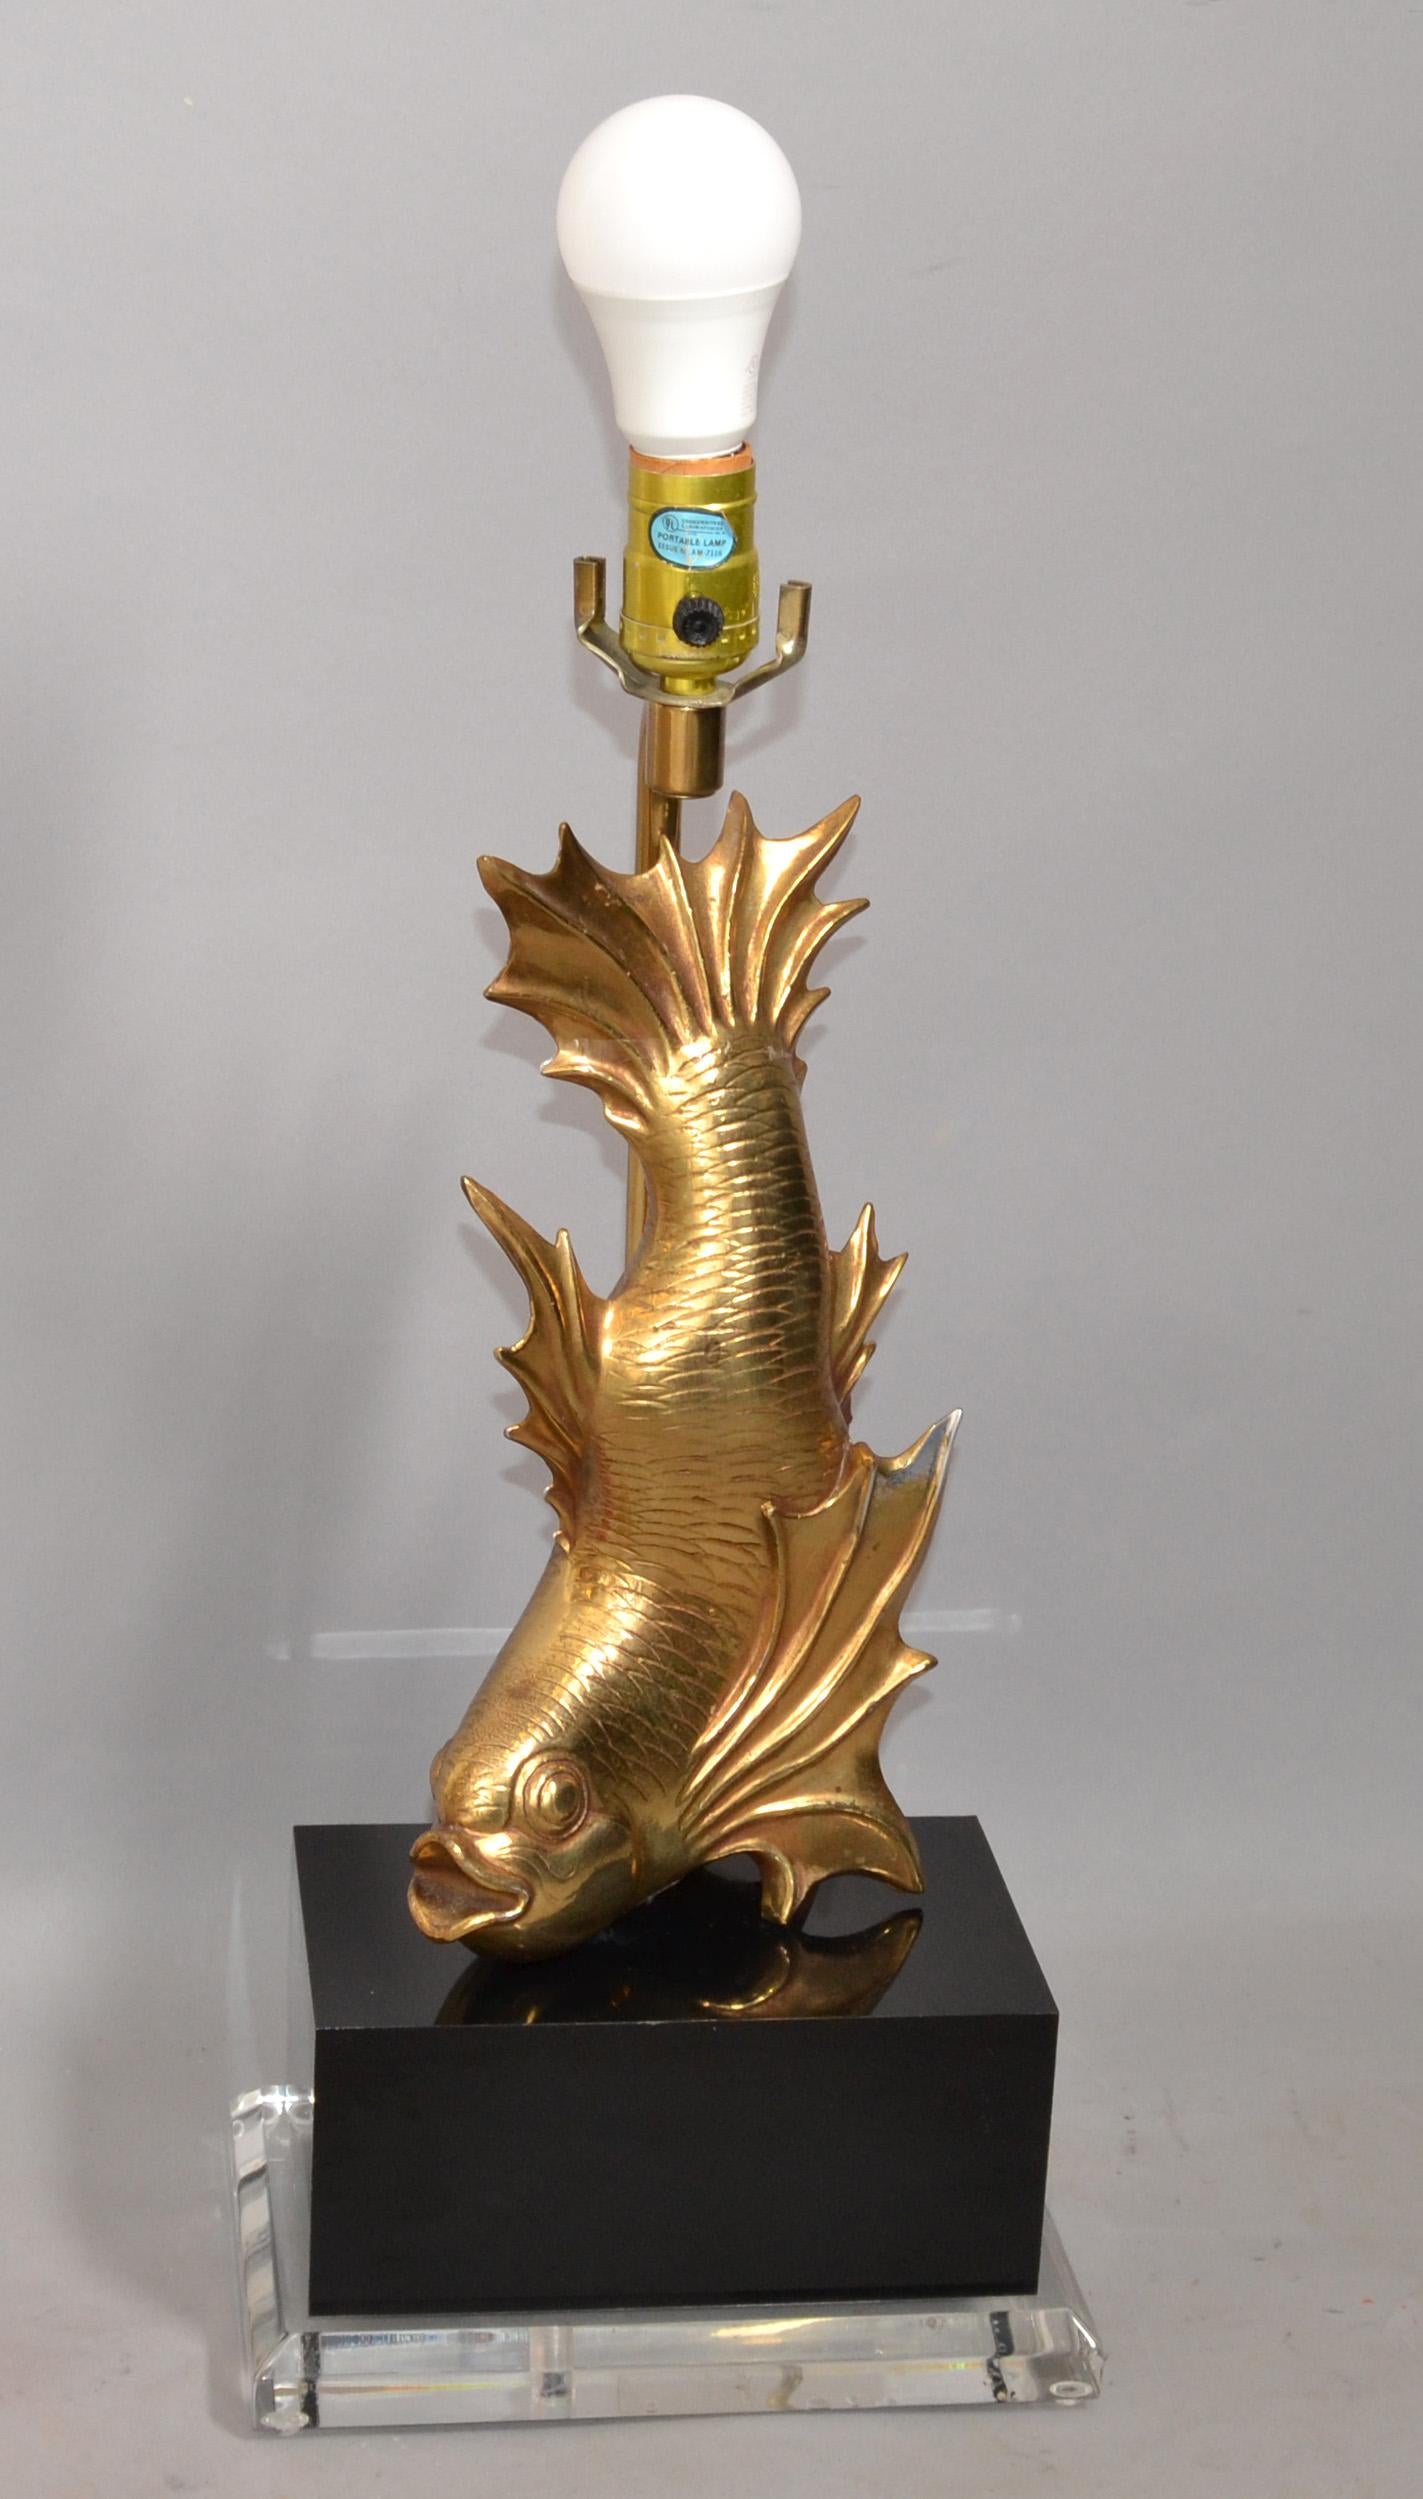 Stylized Japanese Dragon Cast Brass Koi Fish Table Lamp mounted on a transparent beveled Lucite Base and rectangle black acrylic block.
The Lamp is in perfect working condition, wired for the US, UL-Listed and takes a regular or LED Light Bulb.
No